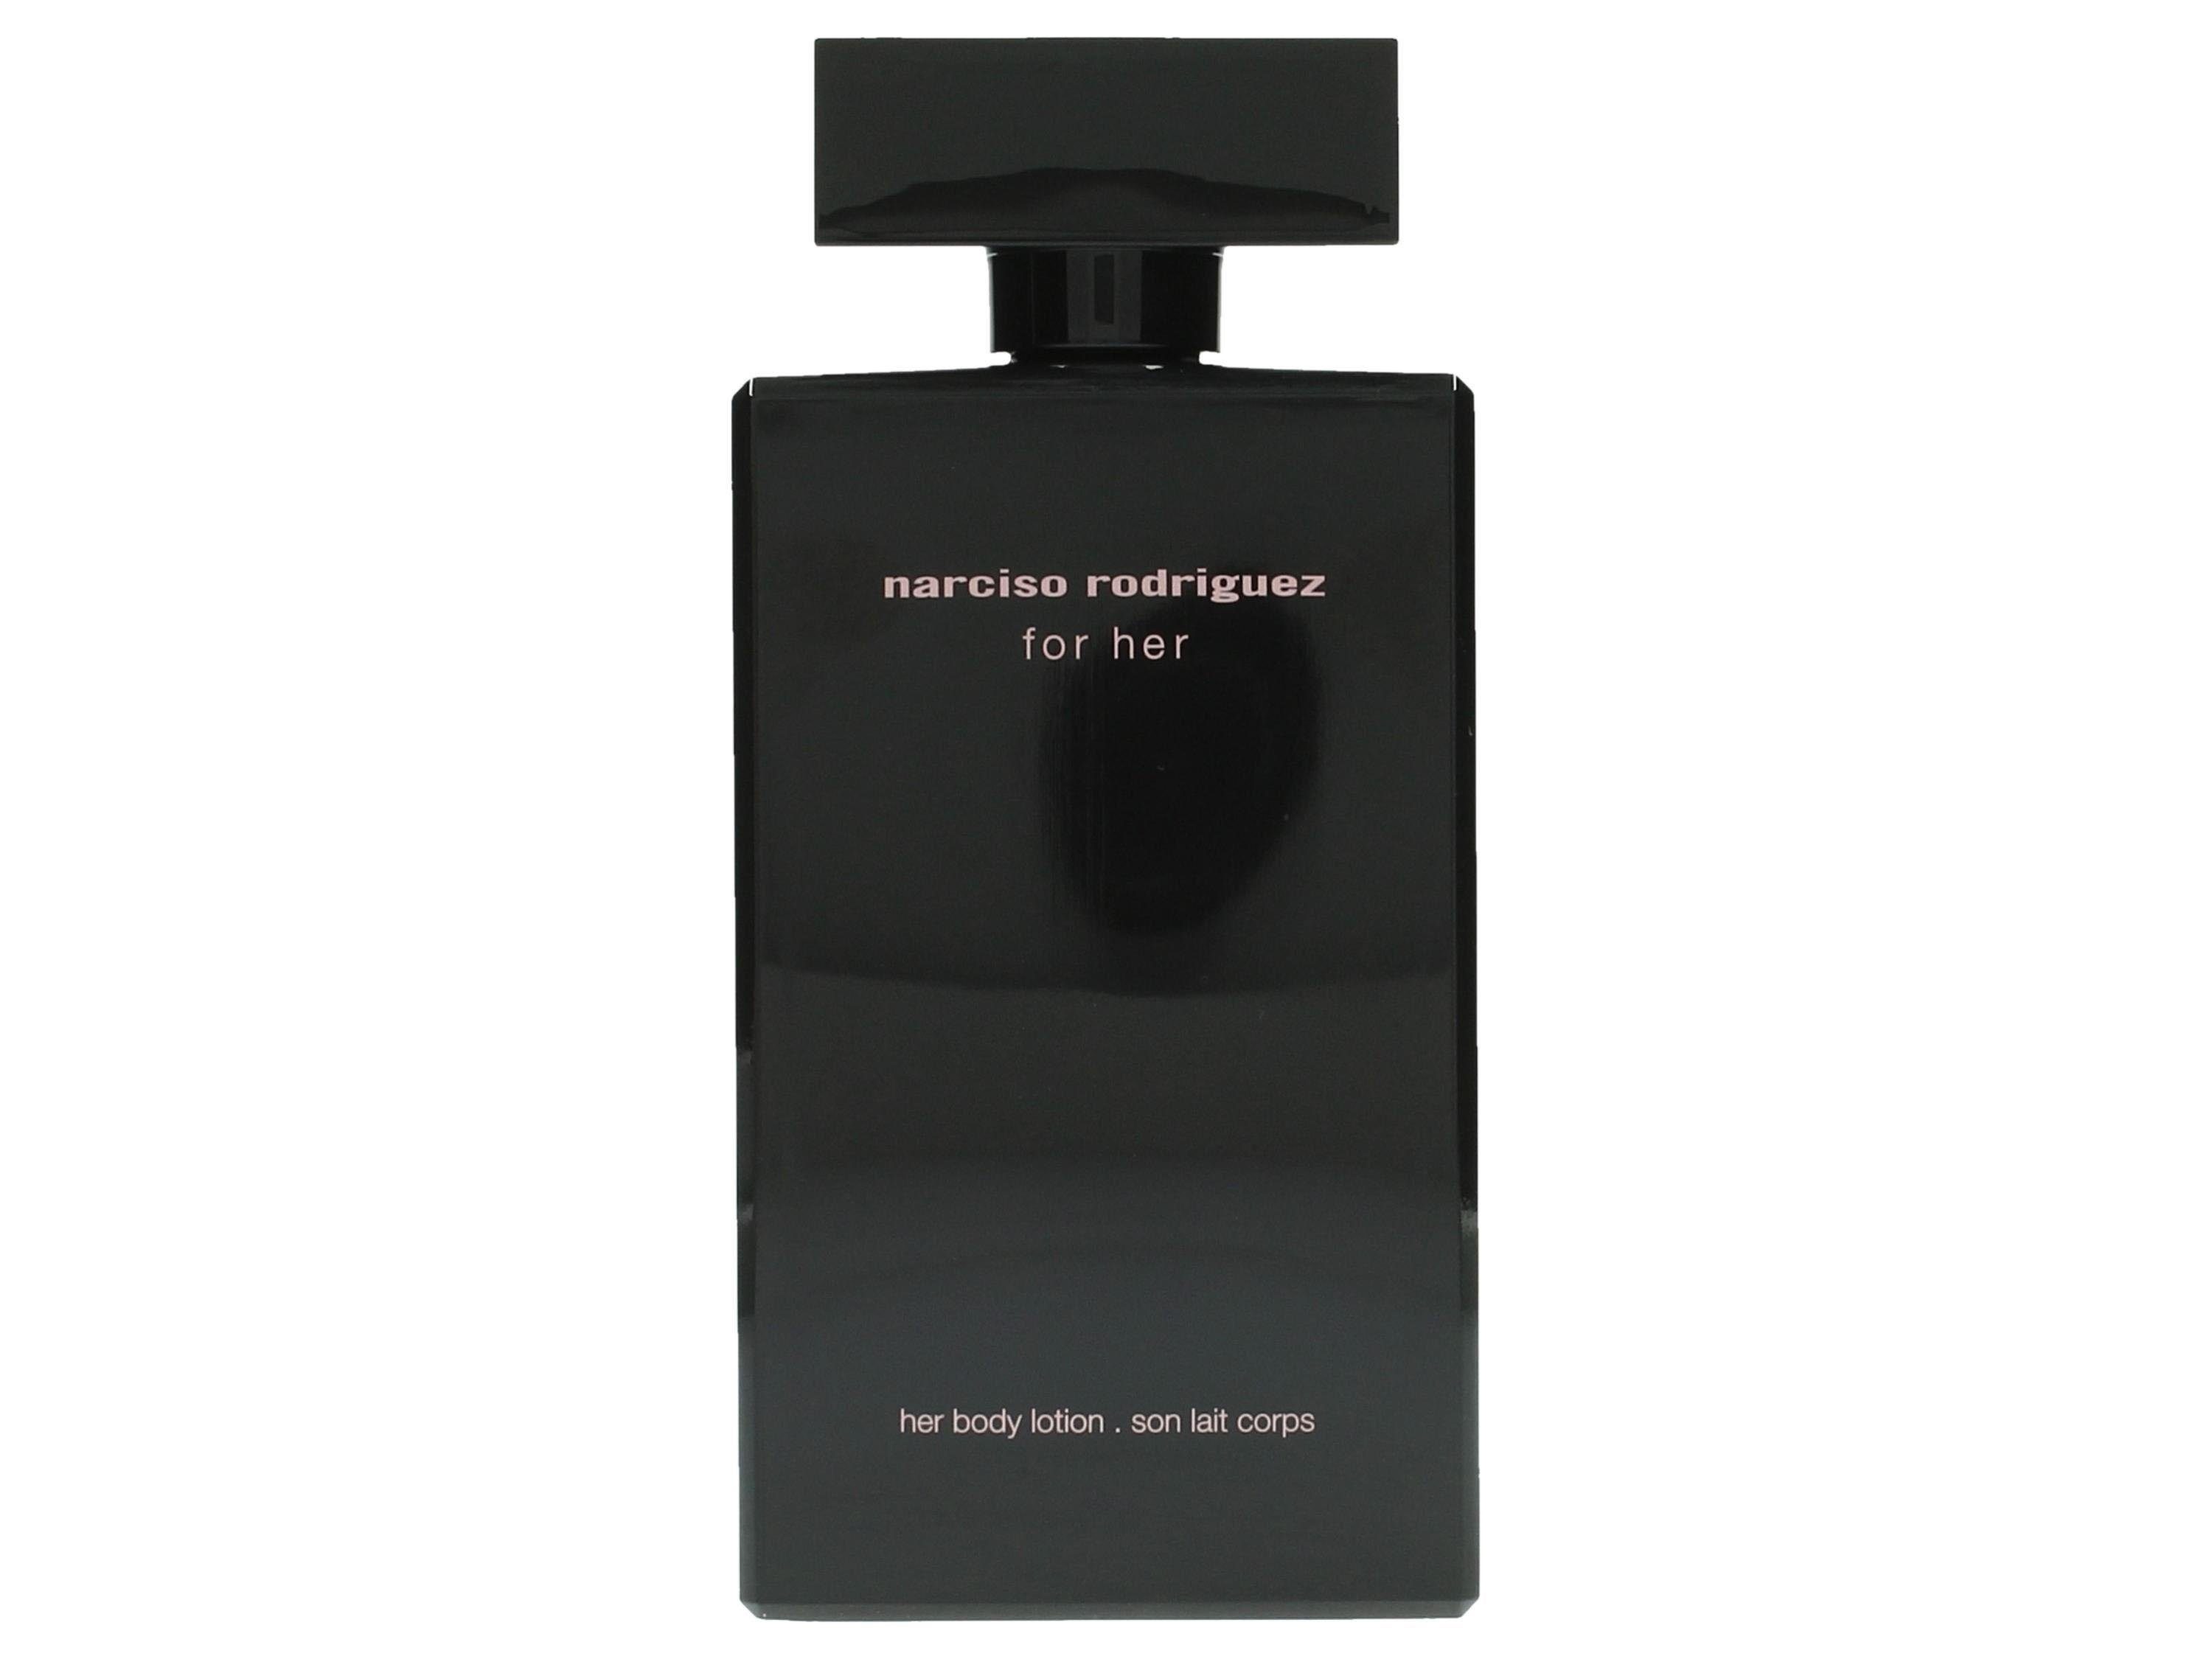 narciso For rodriguez Her Bodylotion